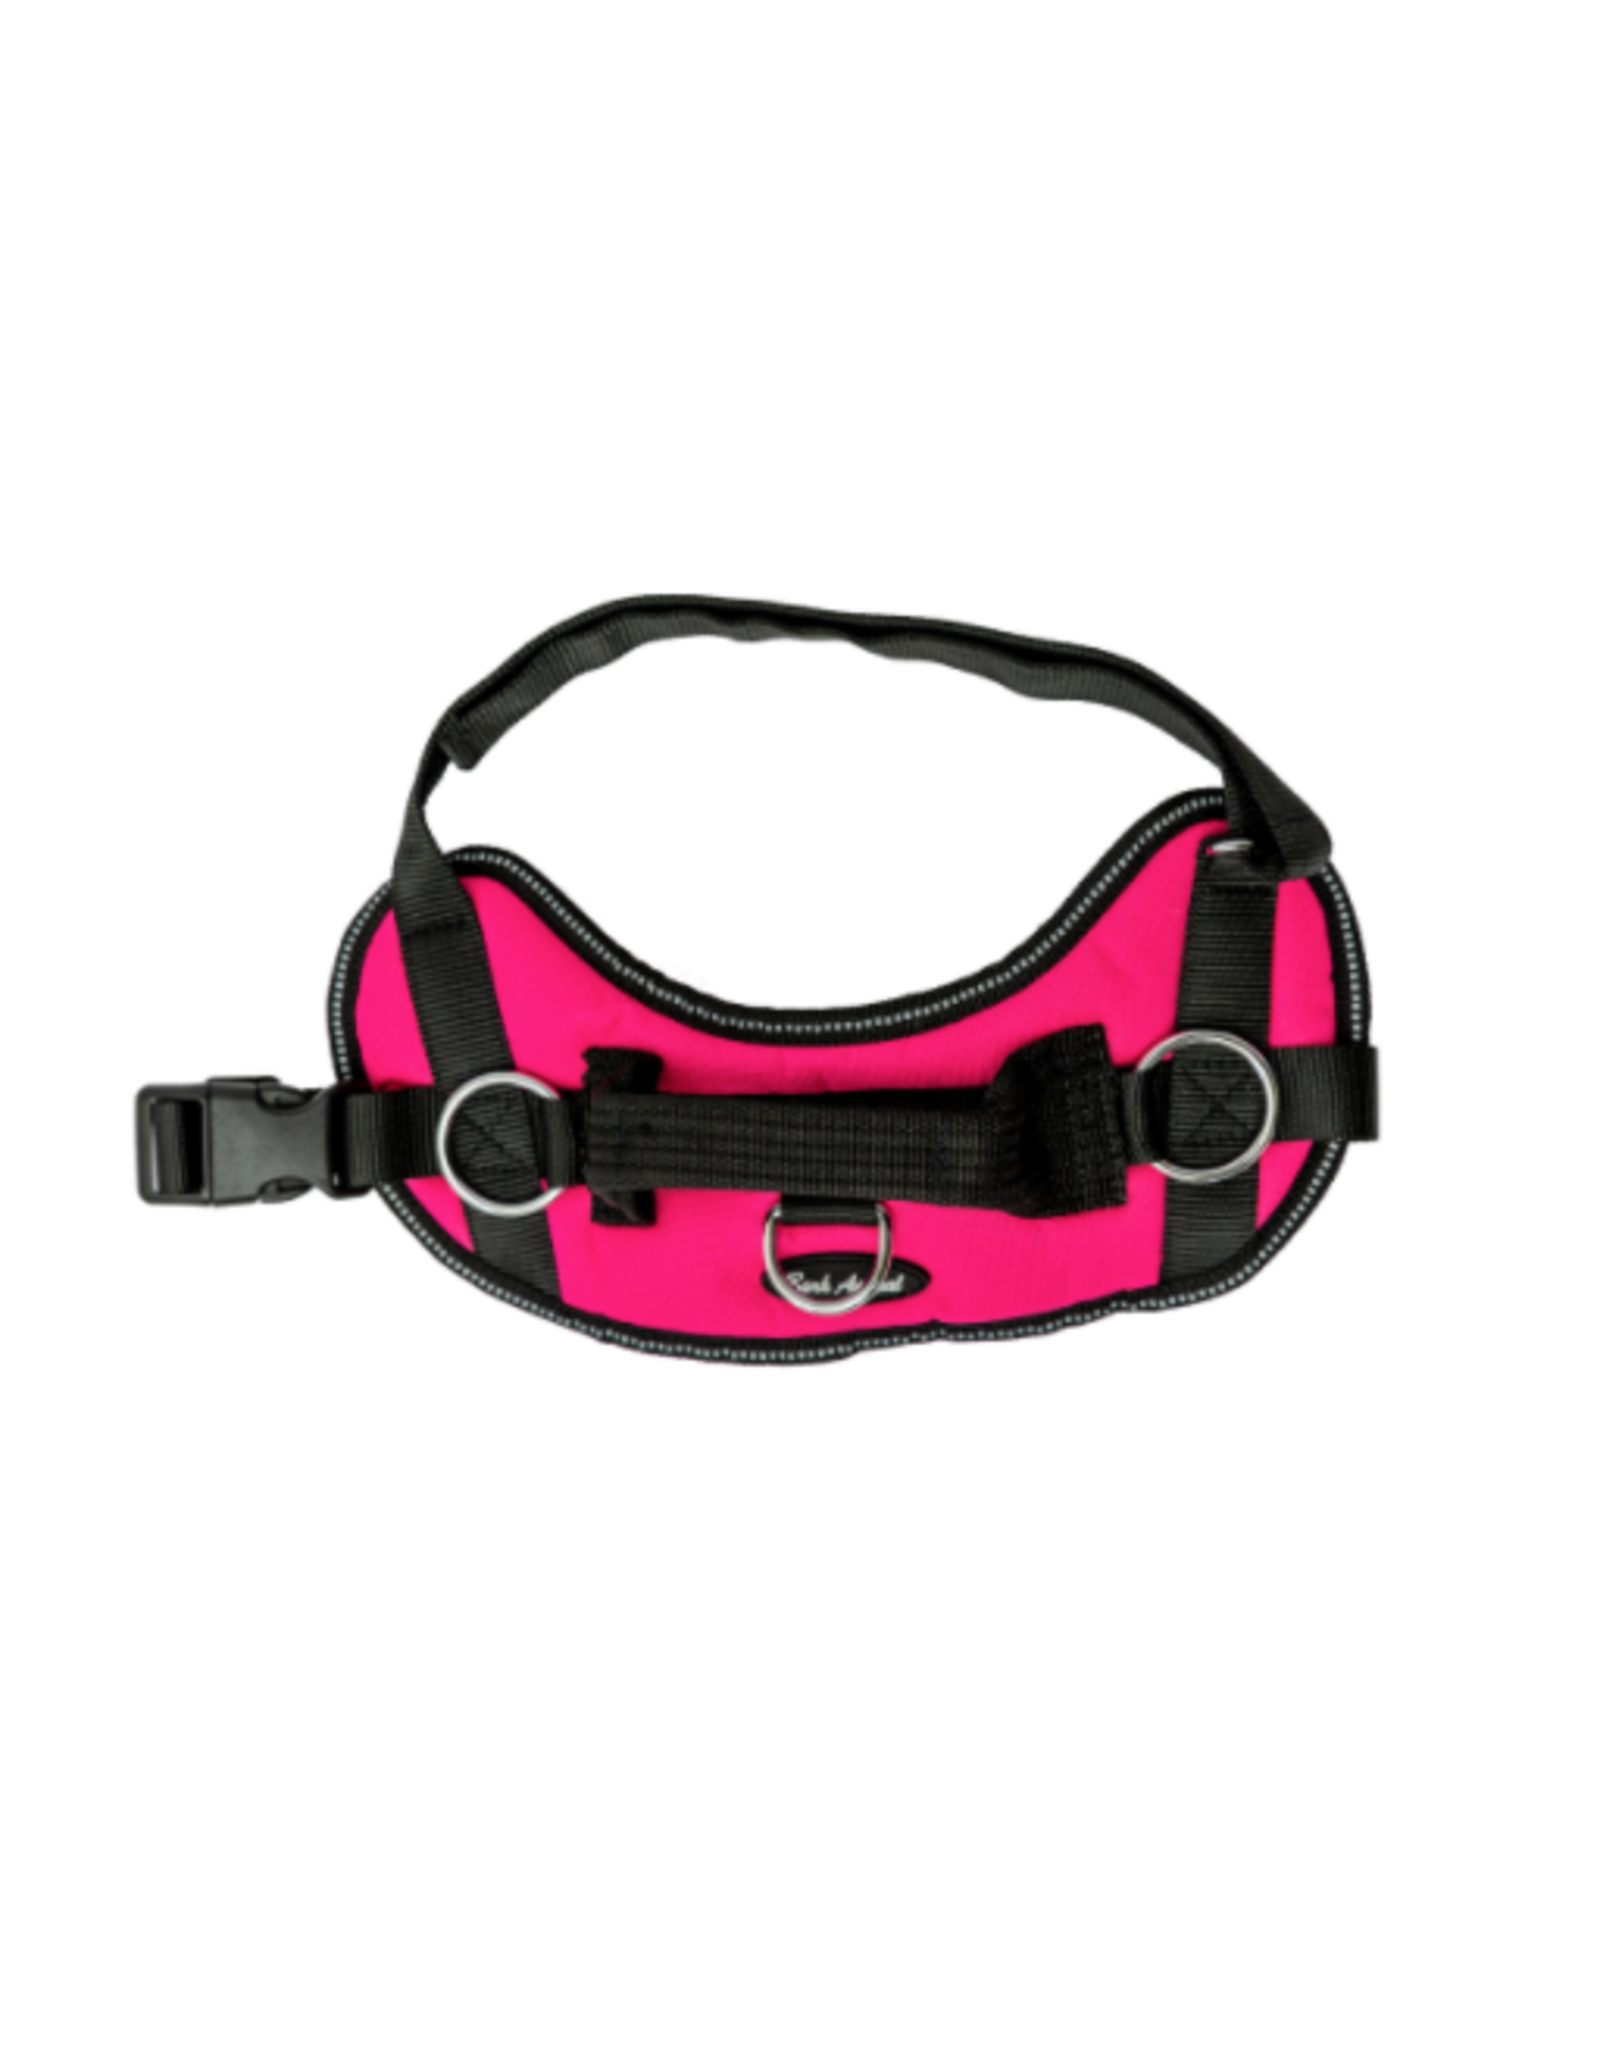 Bark Appeal Bark Appeal Reflective No-Pull Harness